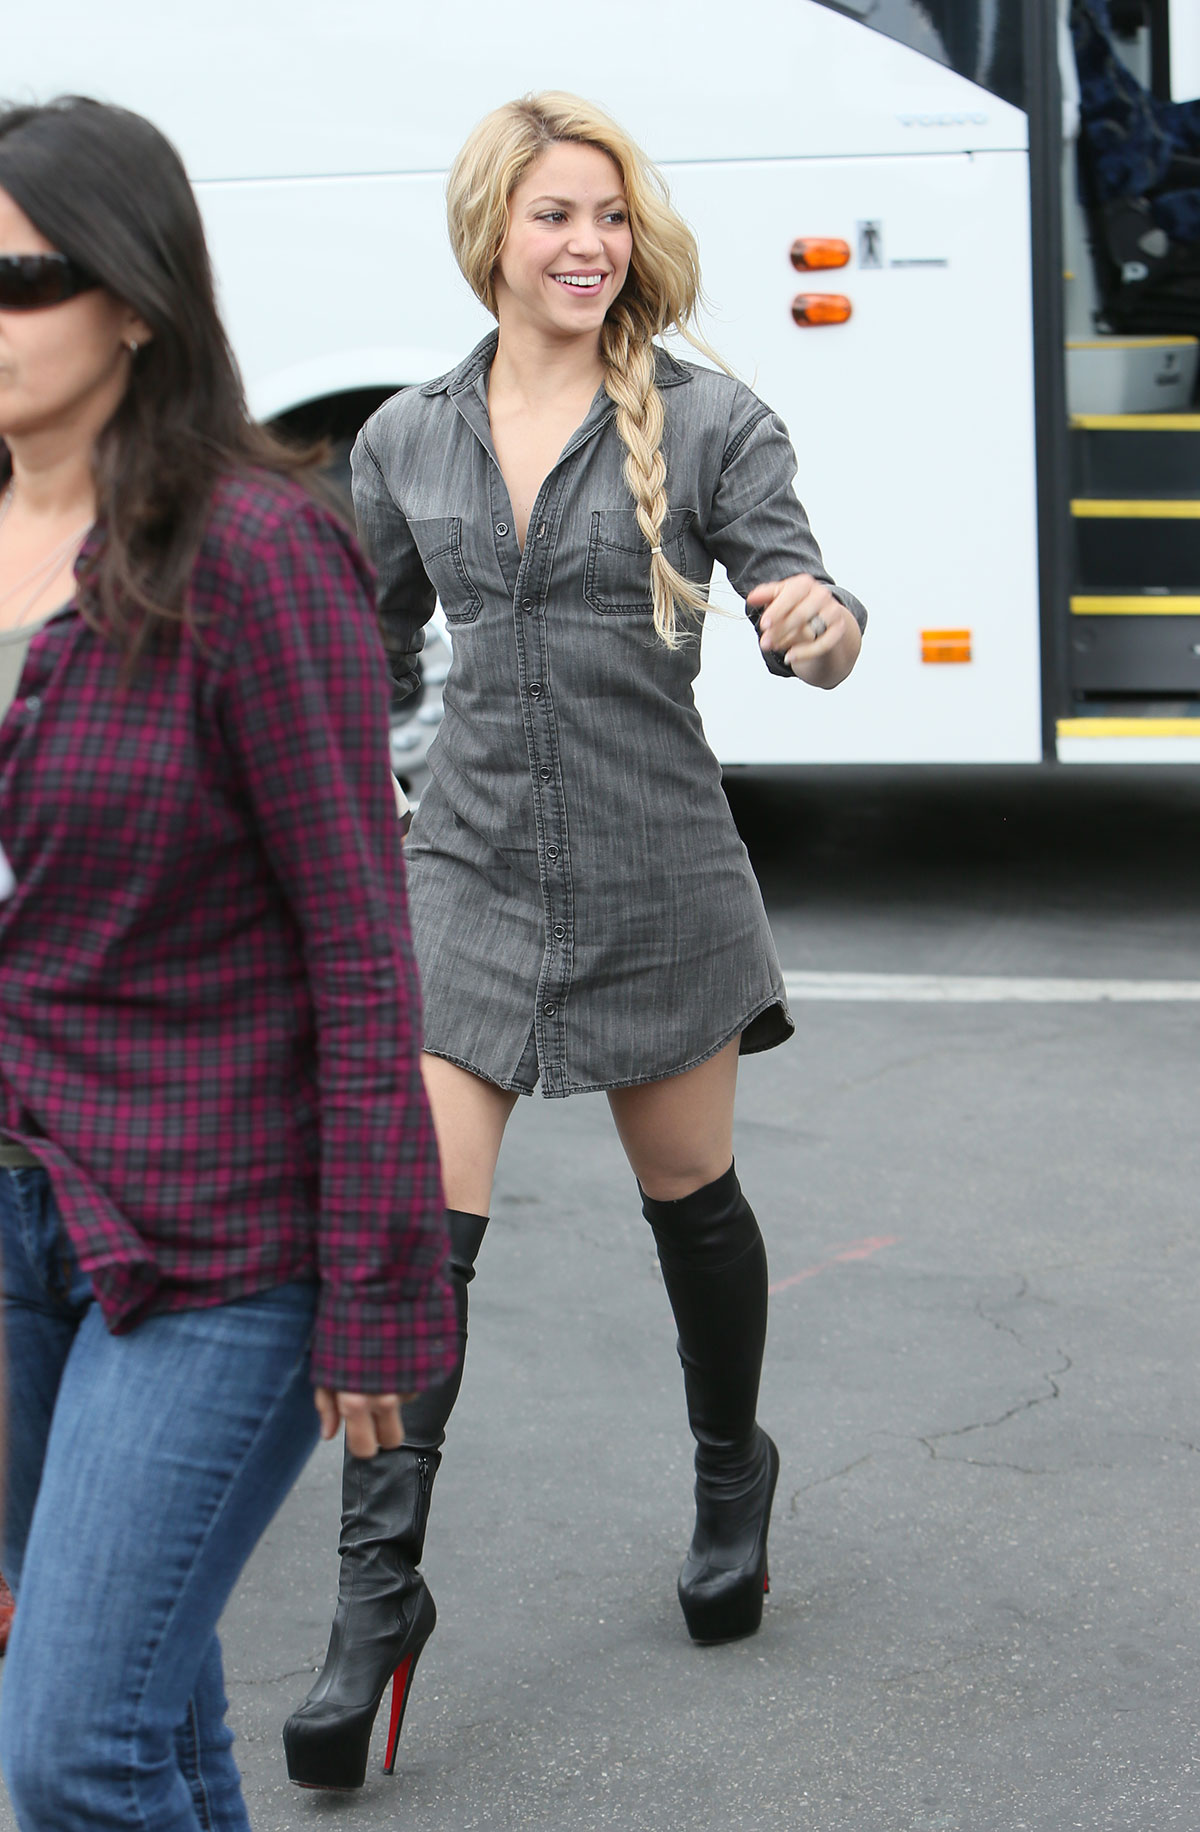 Shakira at Universal Studios Hollywood for appearance on Extra